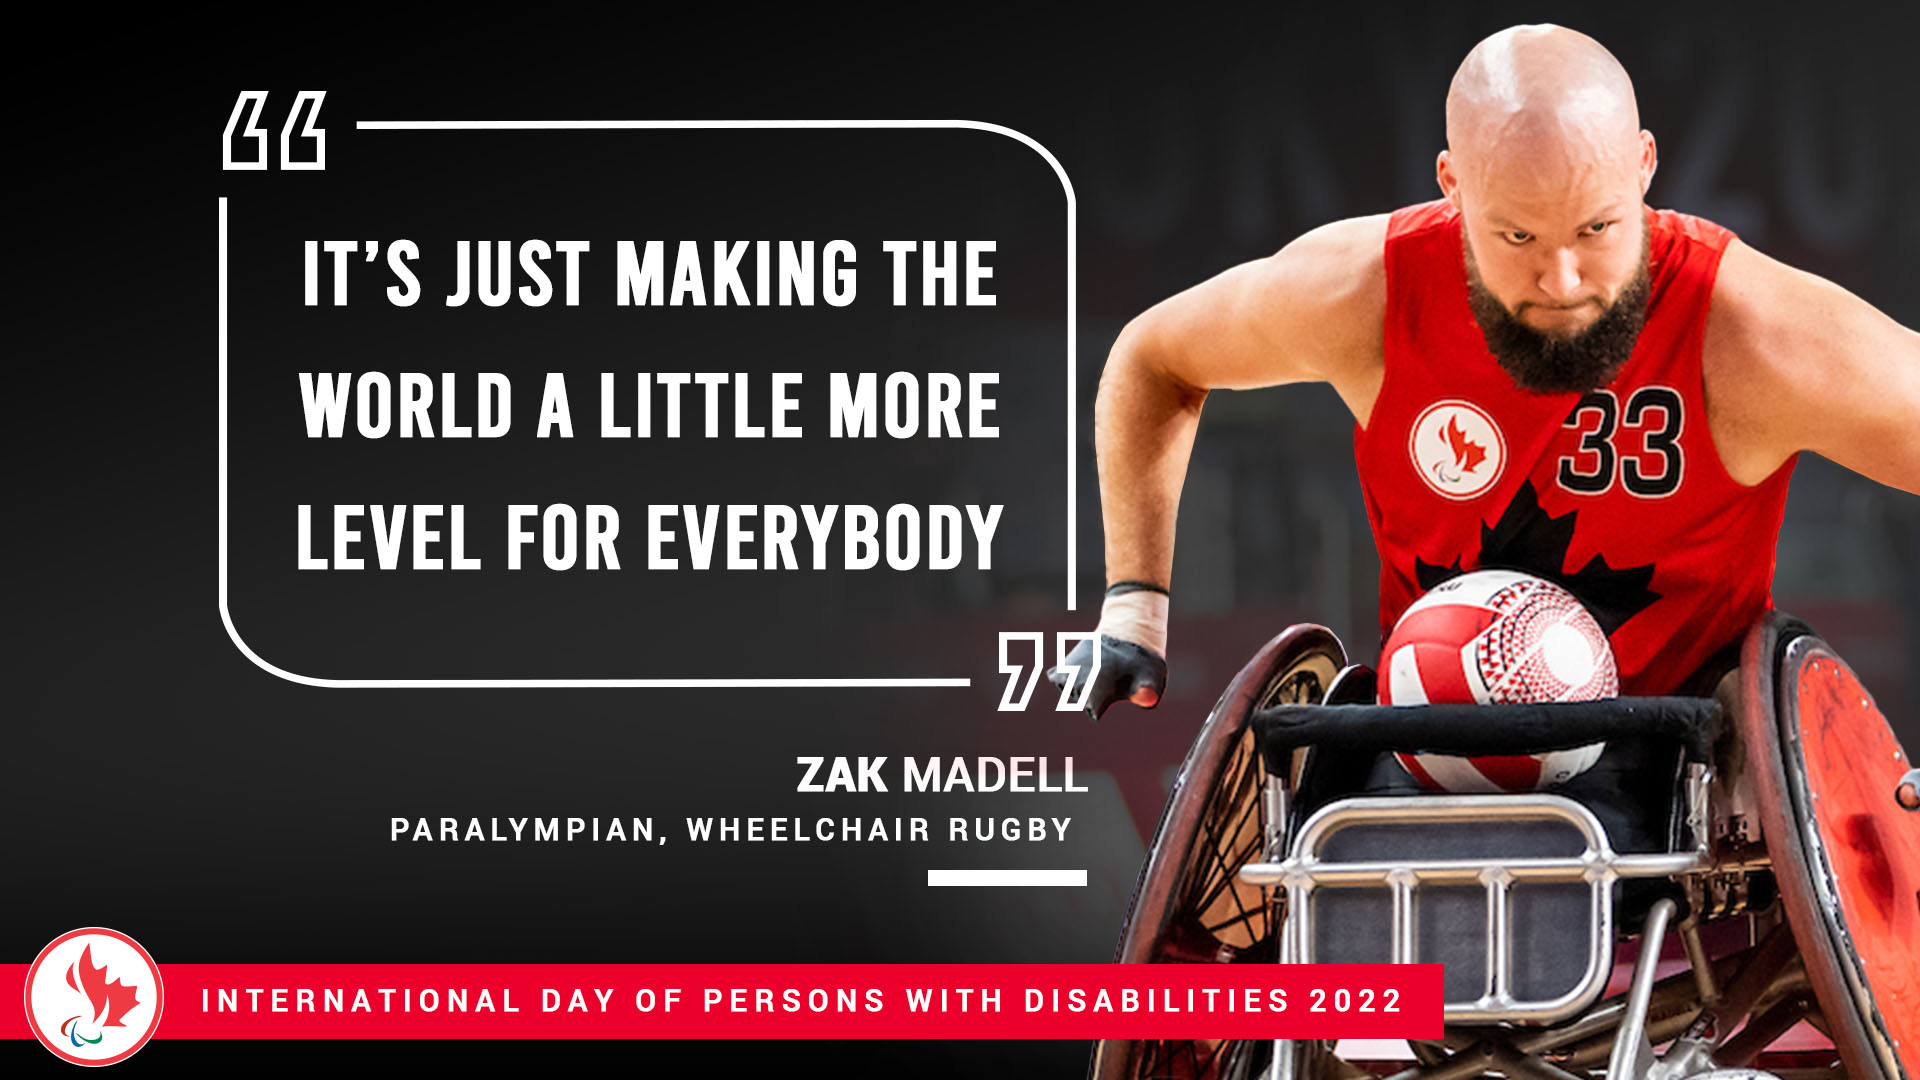 A photo of wheelchair rugby Zak Madell in action with the quote "It's just making the world a little more level for everybody" about International Day of Persons with Disabilities